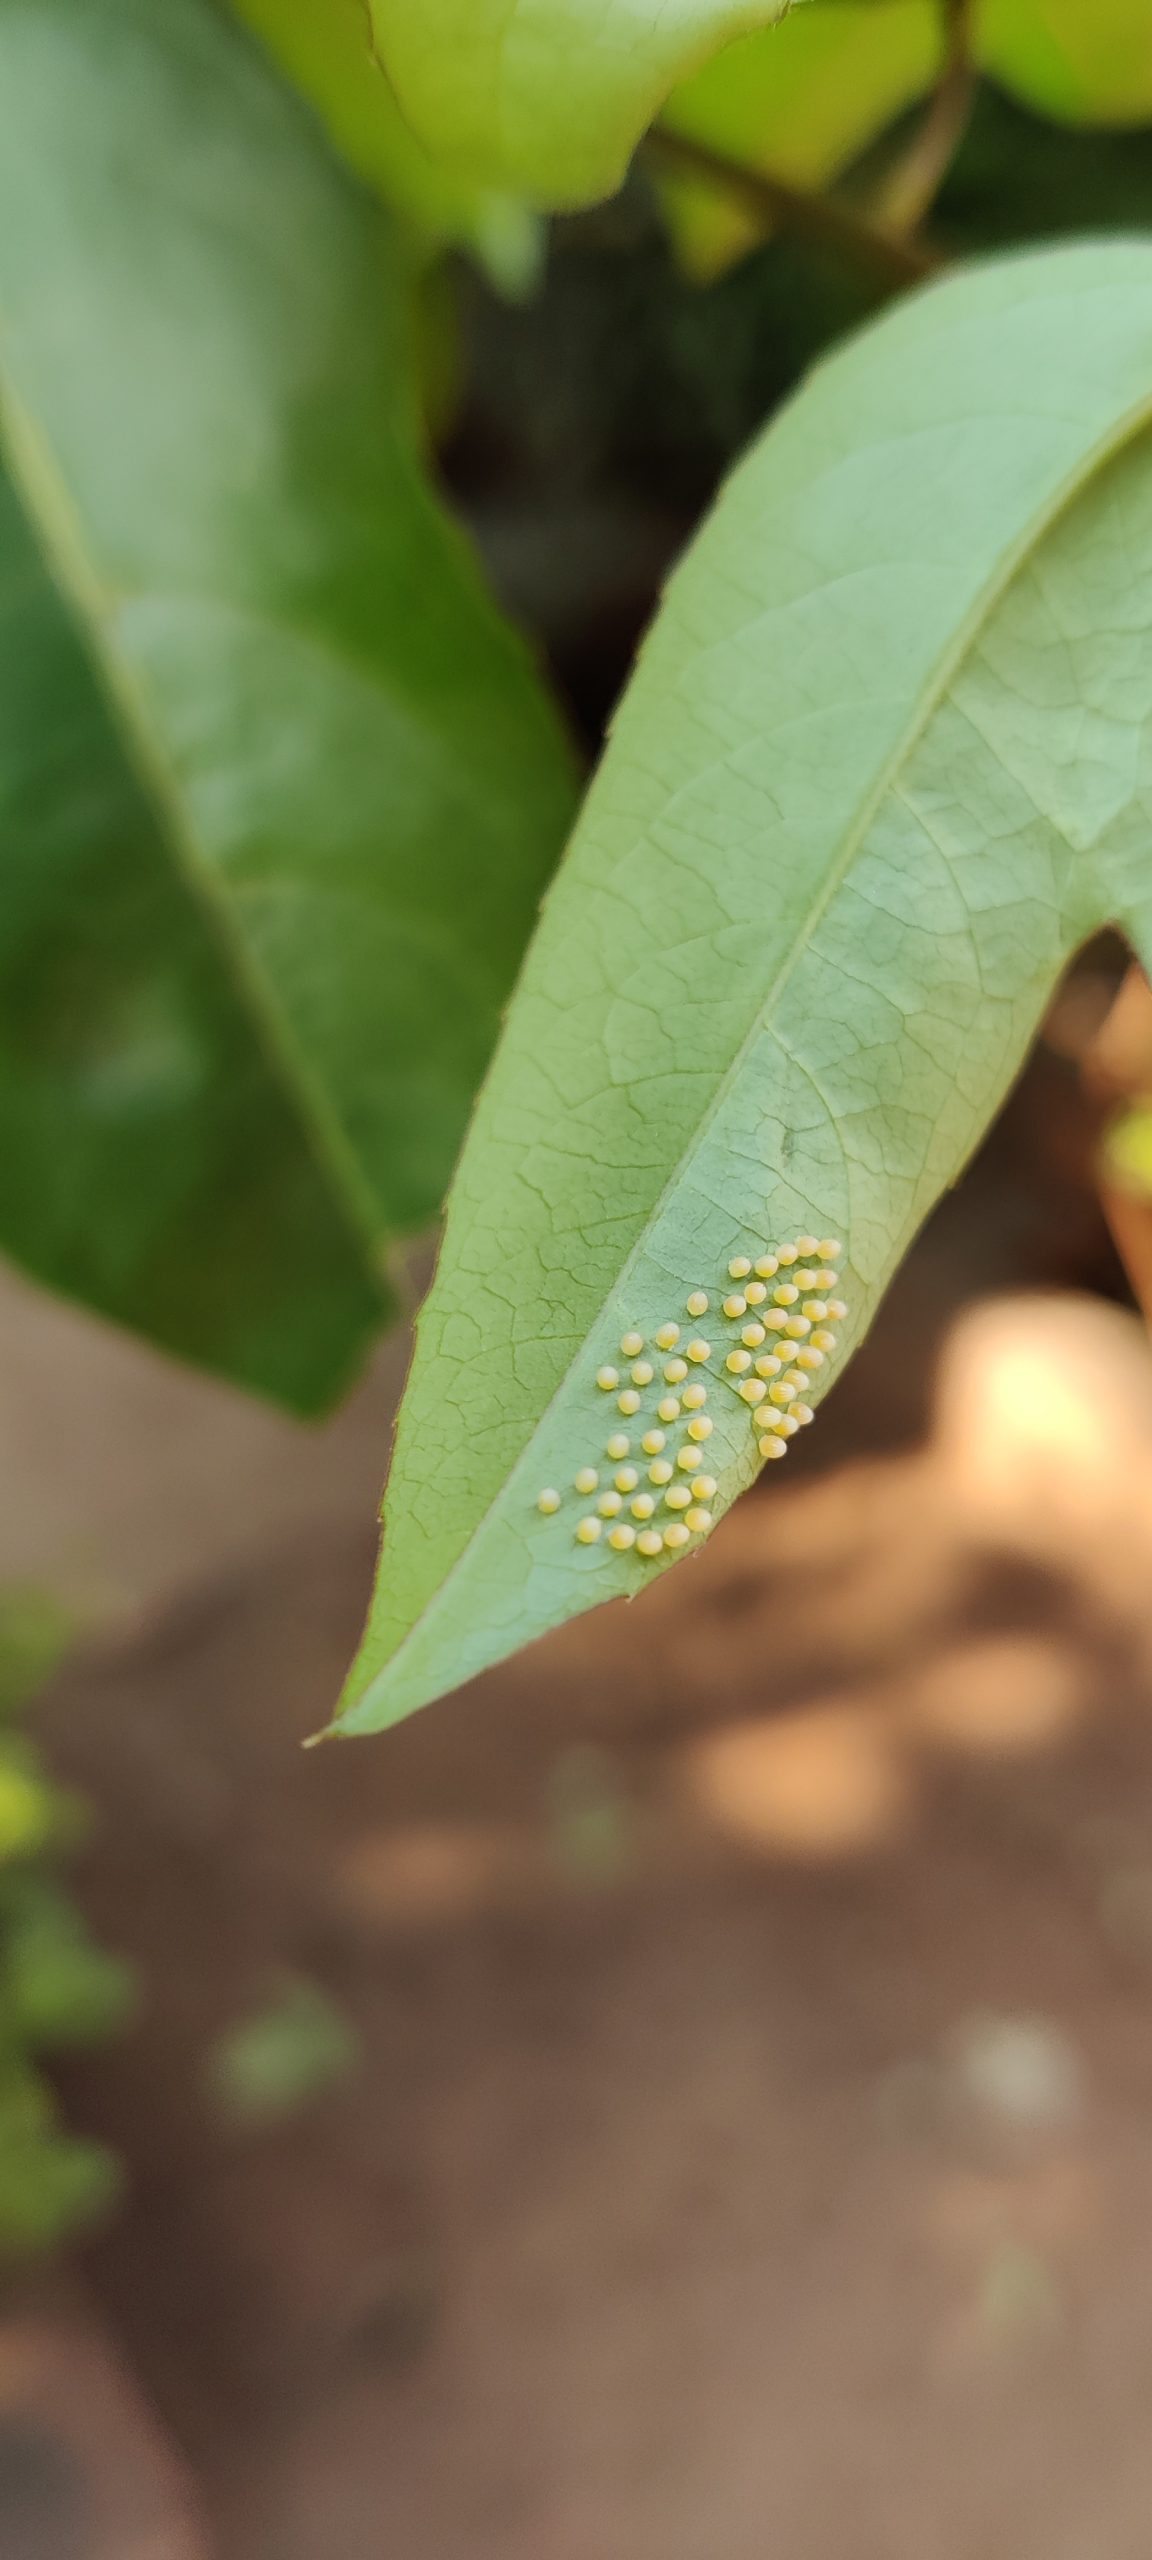 Eggs of an insect on a leaf